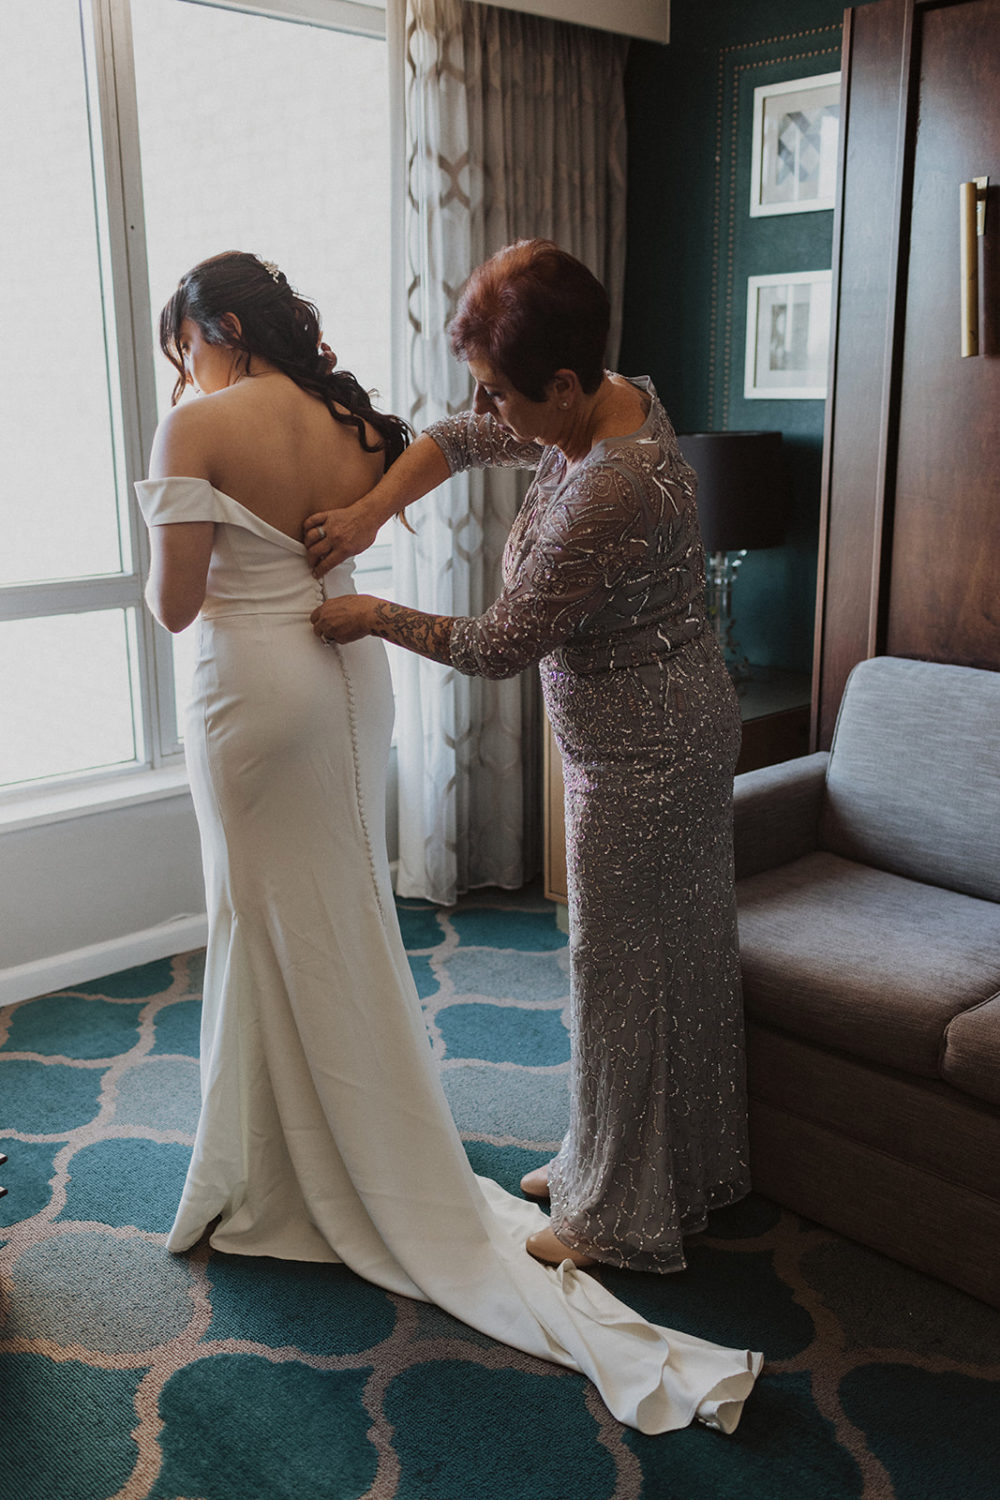 mom buttons bride's dress in DC hotel at urban wedding